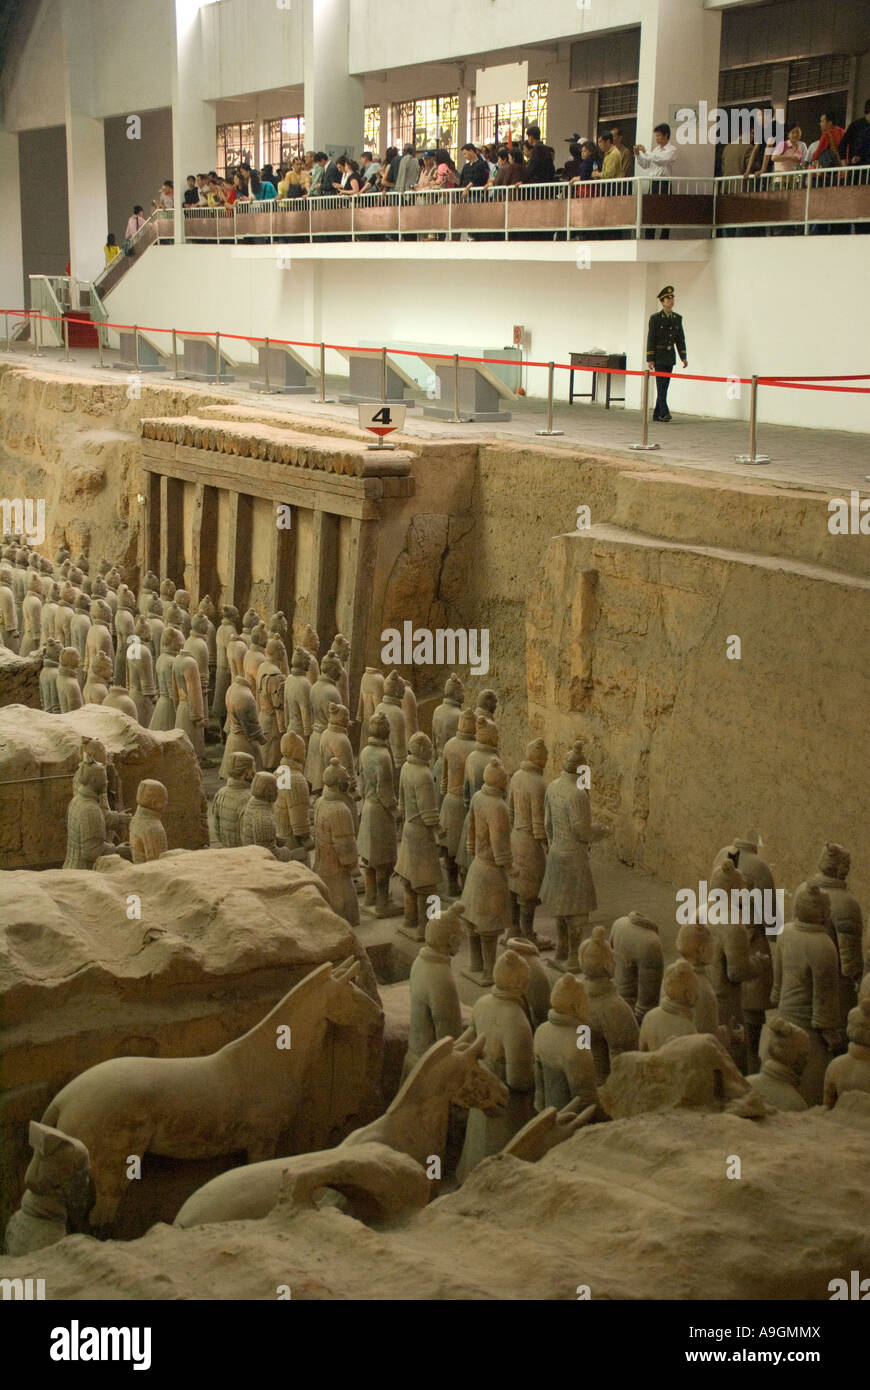 Xian's terra cotta army in Qin Shihuangdi Museum pit number 1 being viewed by tourists, China Stock Photo